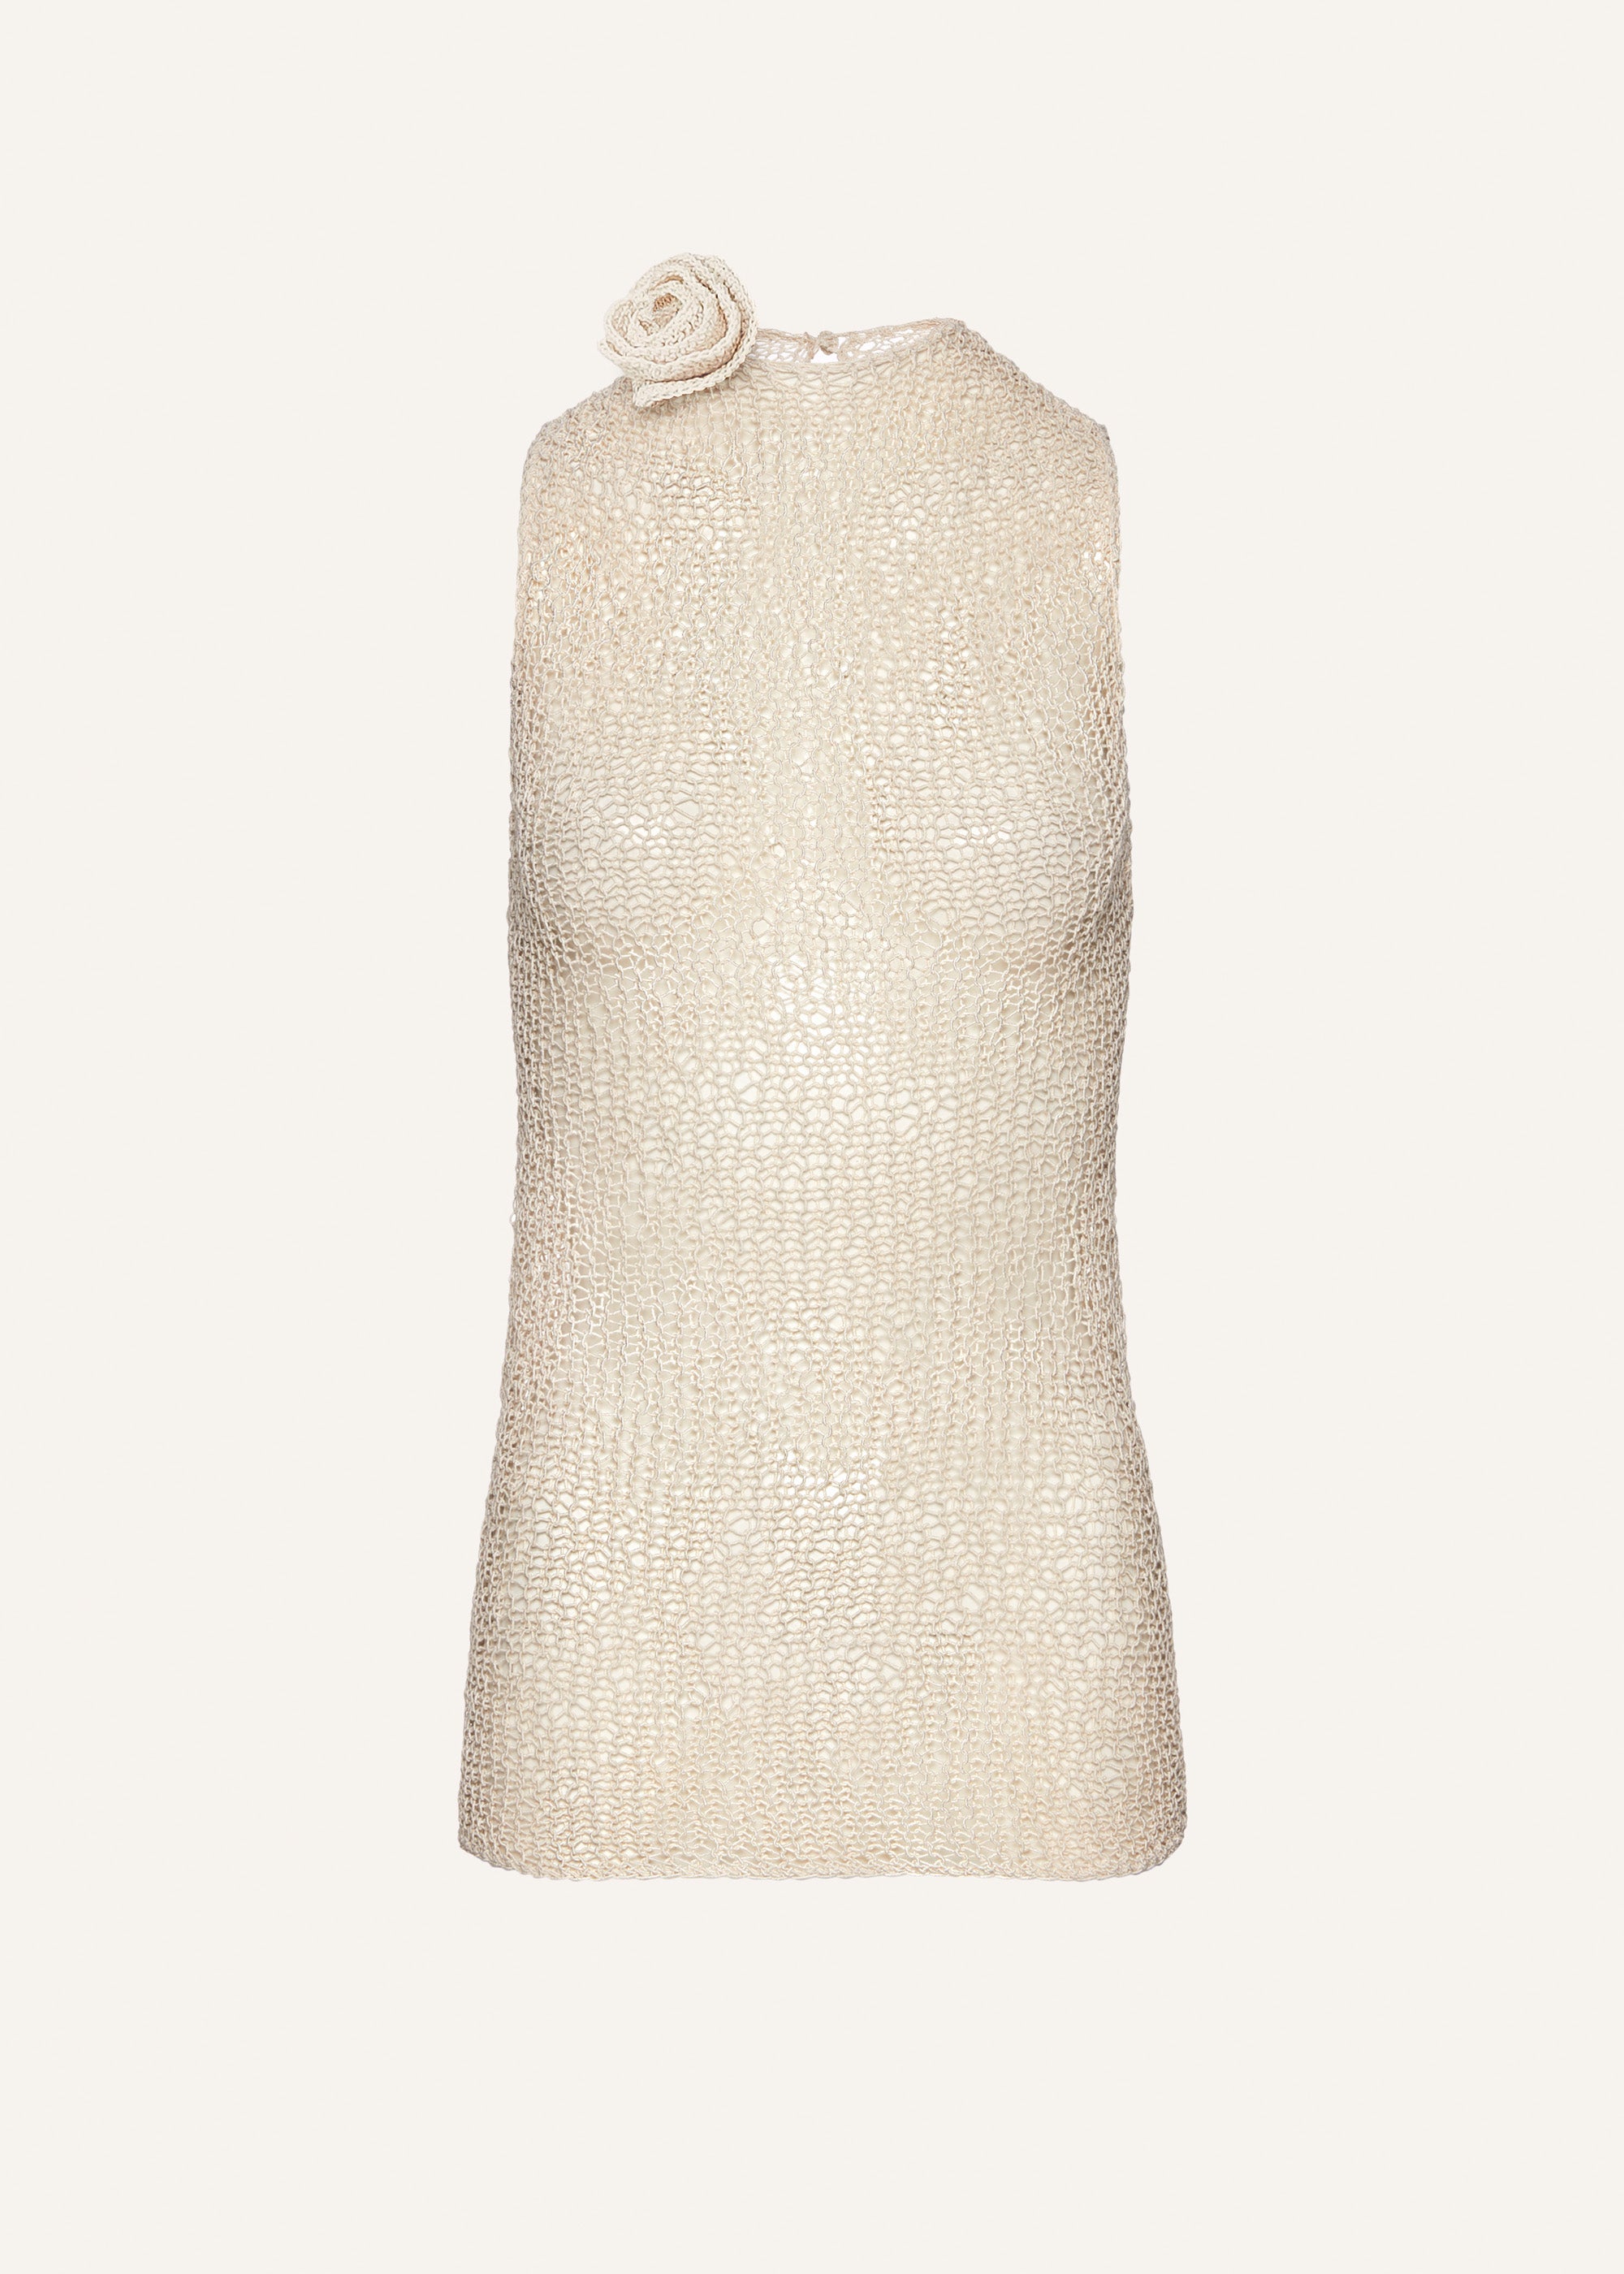 Netted crochet high neck top in cream | Magda Butrym